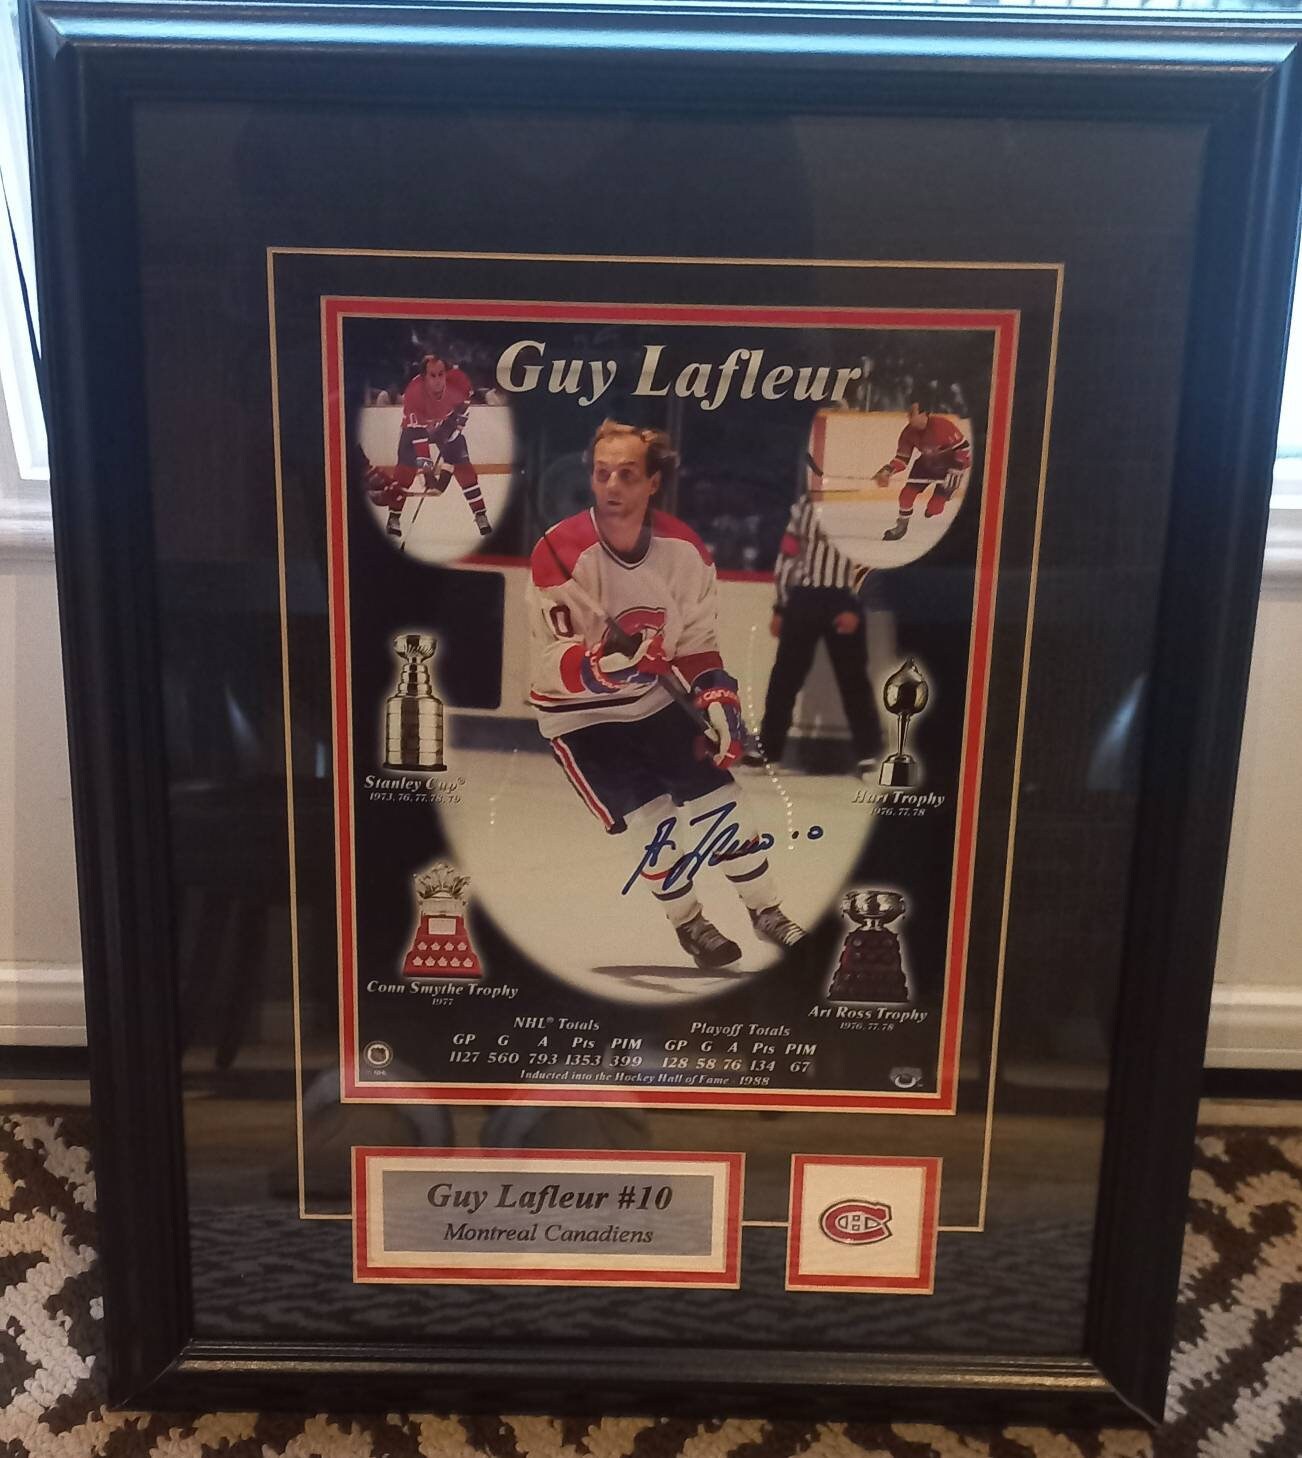 Guy Lafleur Jersey - Picture of Montreal Canadiens Hall of Fame -  Tripadvisor